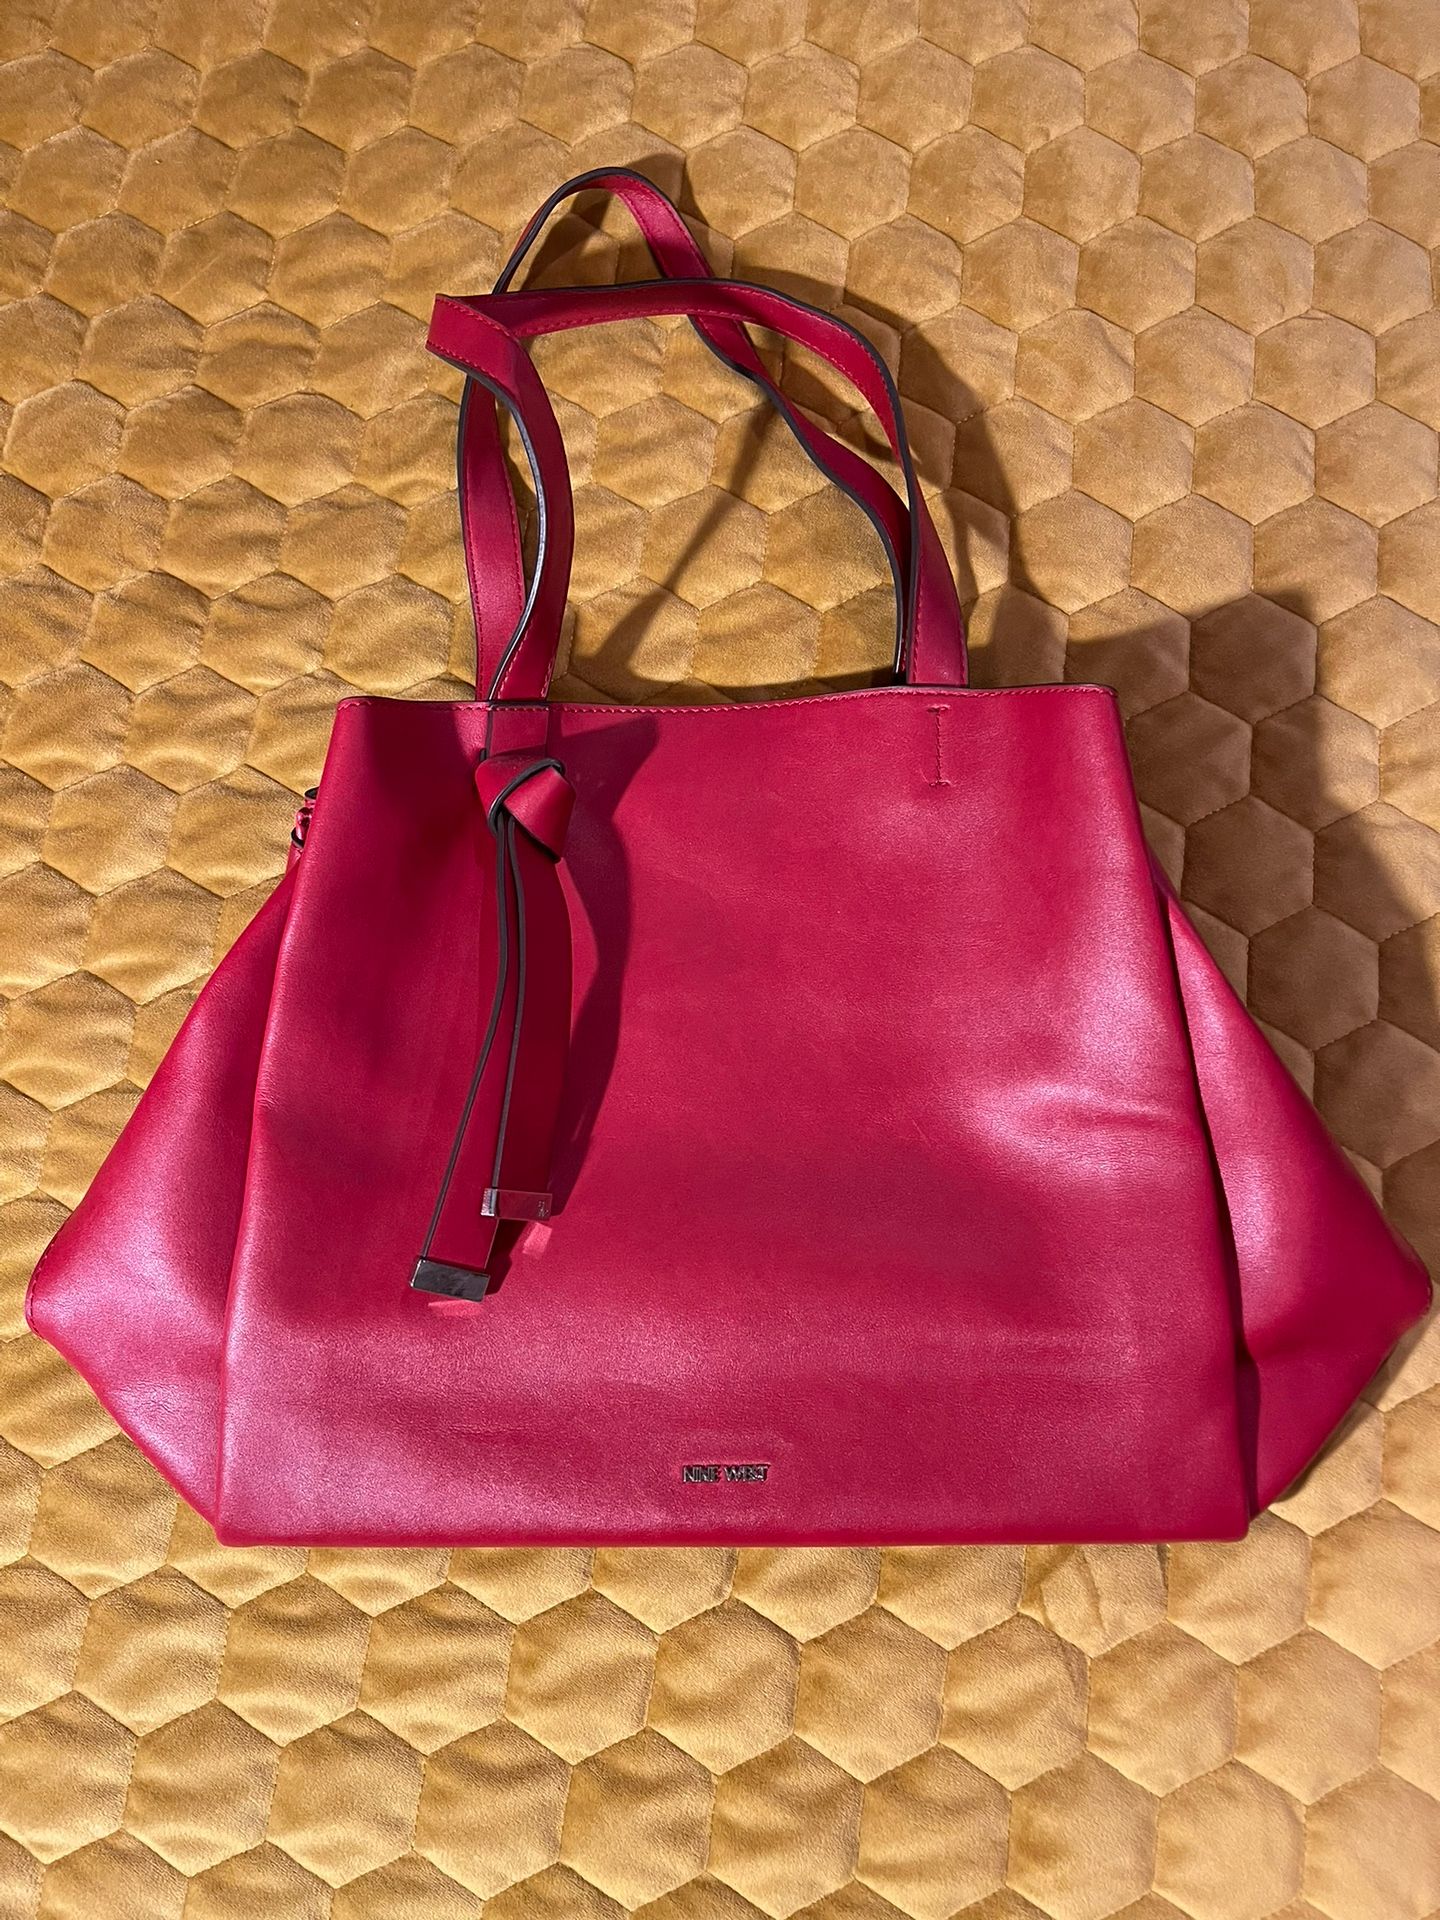 Nine West Tote, Red, Genuine Leather